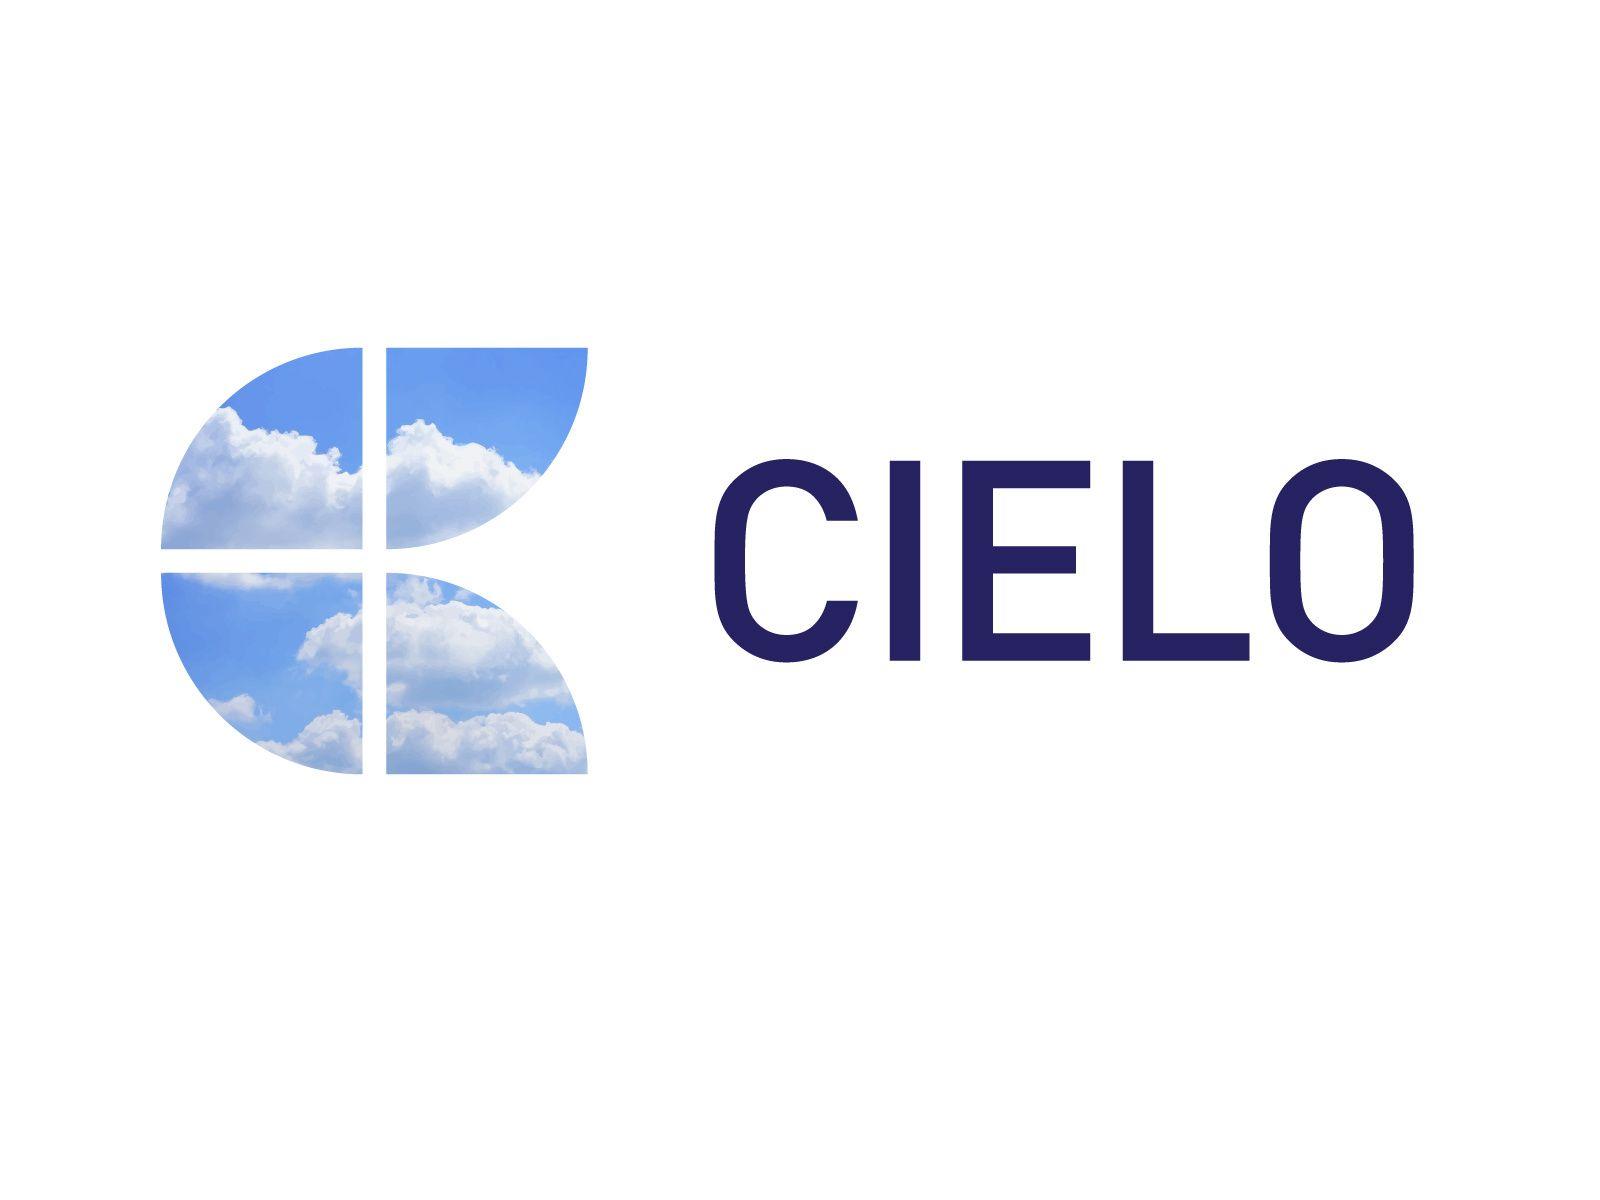 Clouds Logo - Cielo Clouds Logo by Jacob Cass on Dribbble